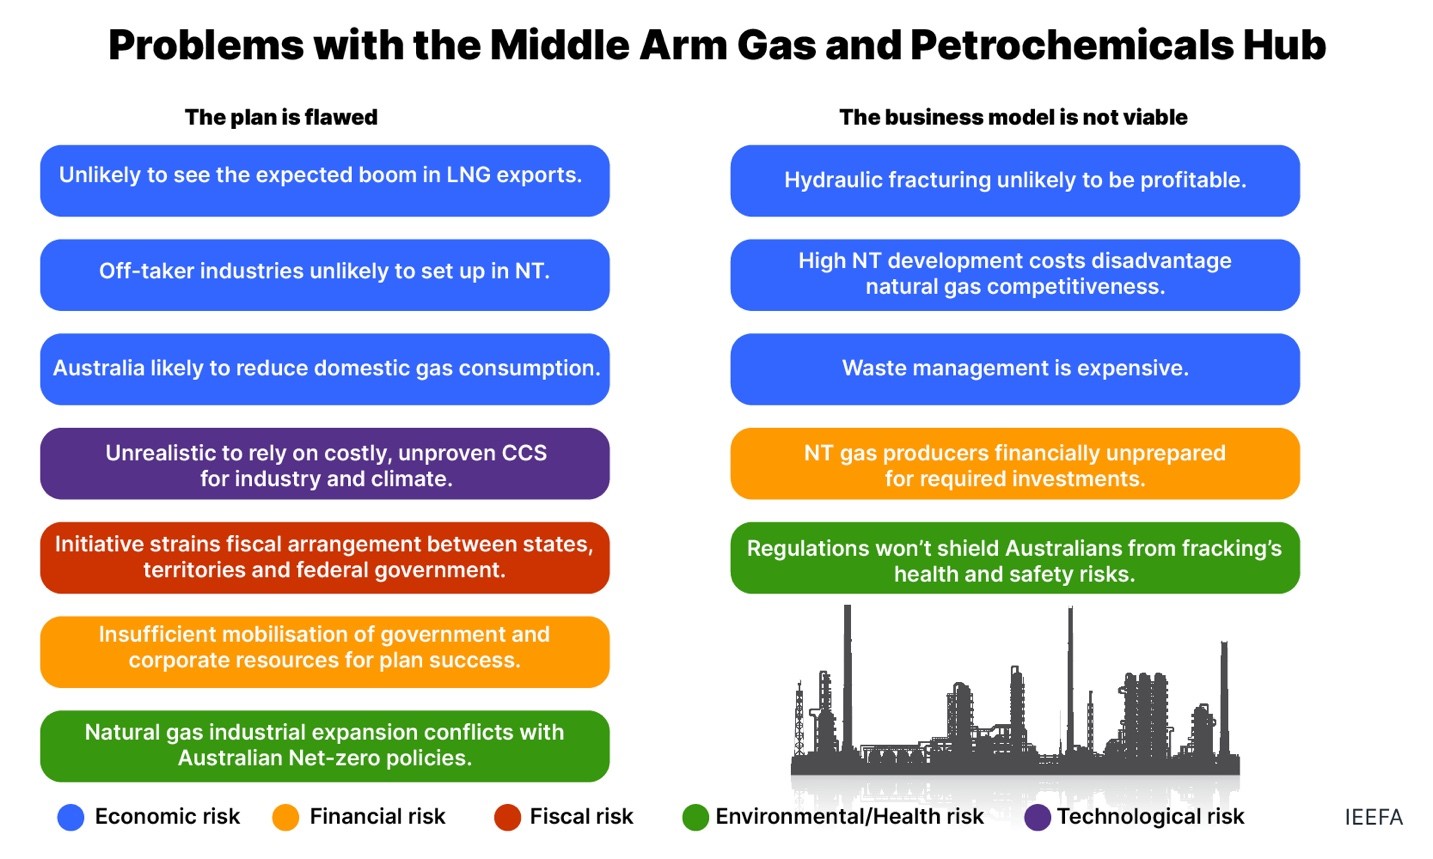 Problems with the Middle arm gas and petrochemicals hub